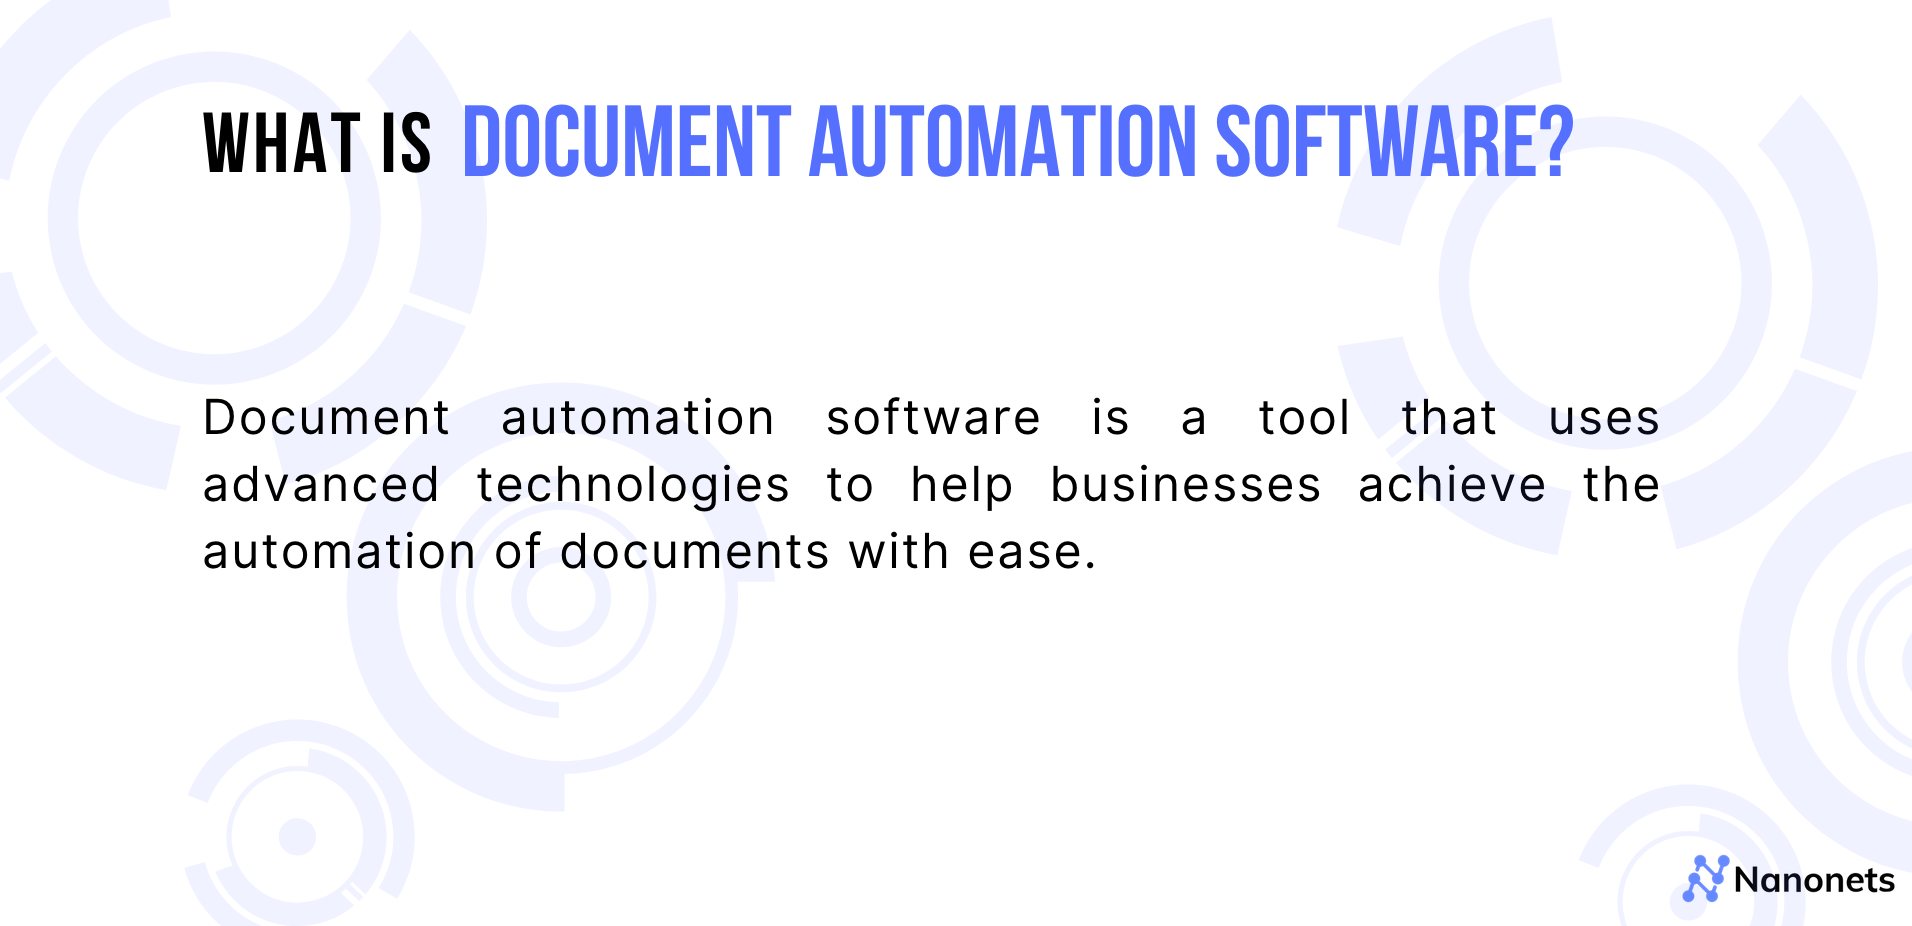 What is document automation software?